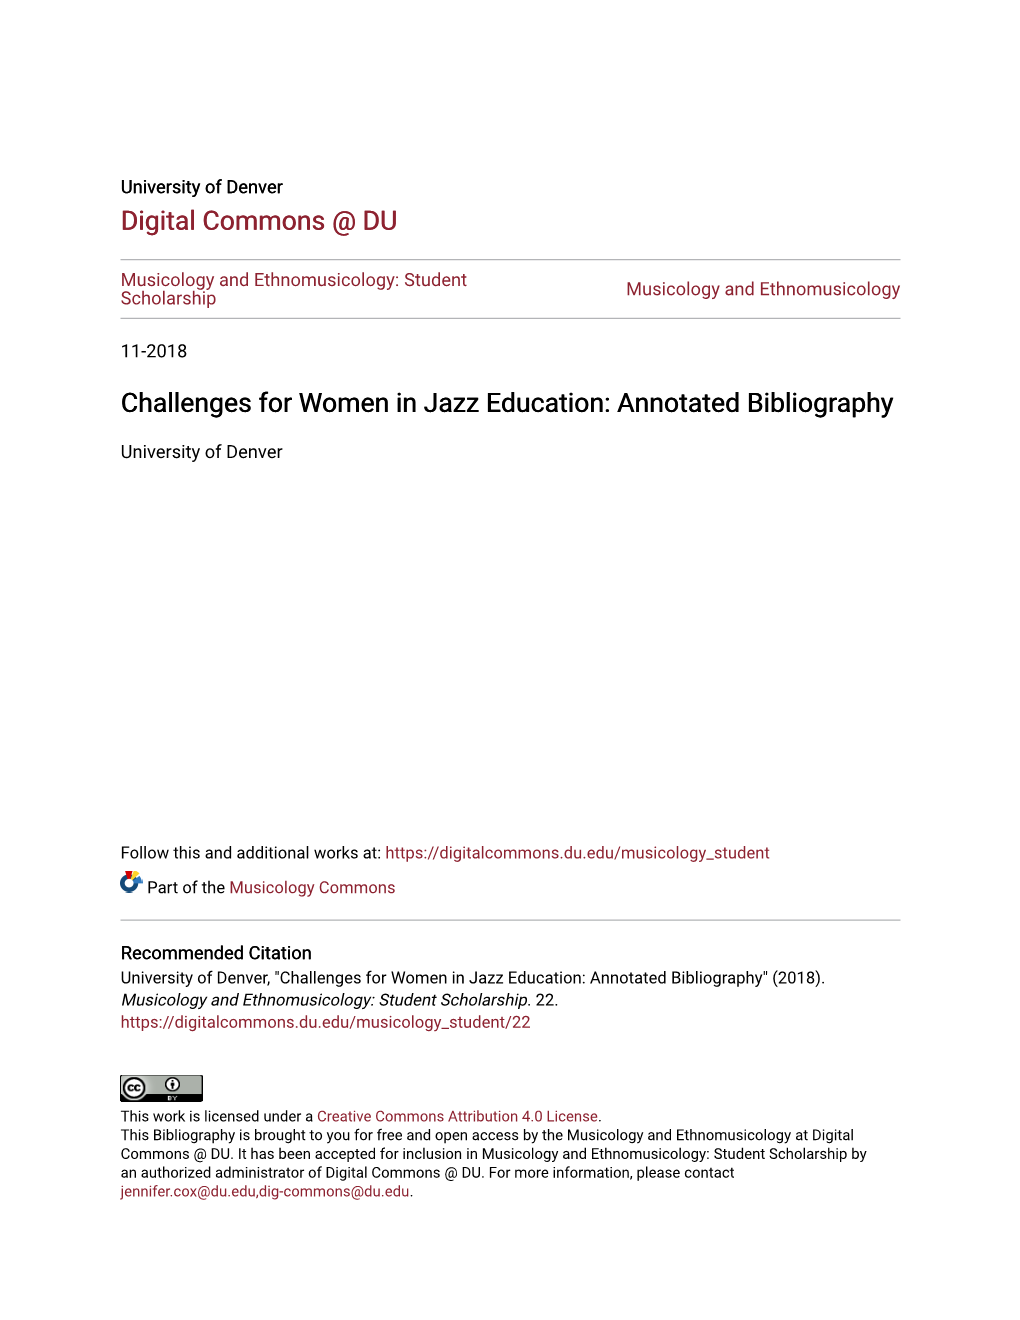 Challenges for Women in Jazz Education: Annotated Bibliography